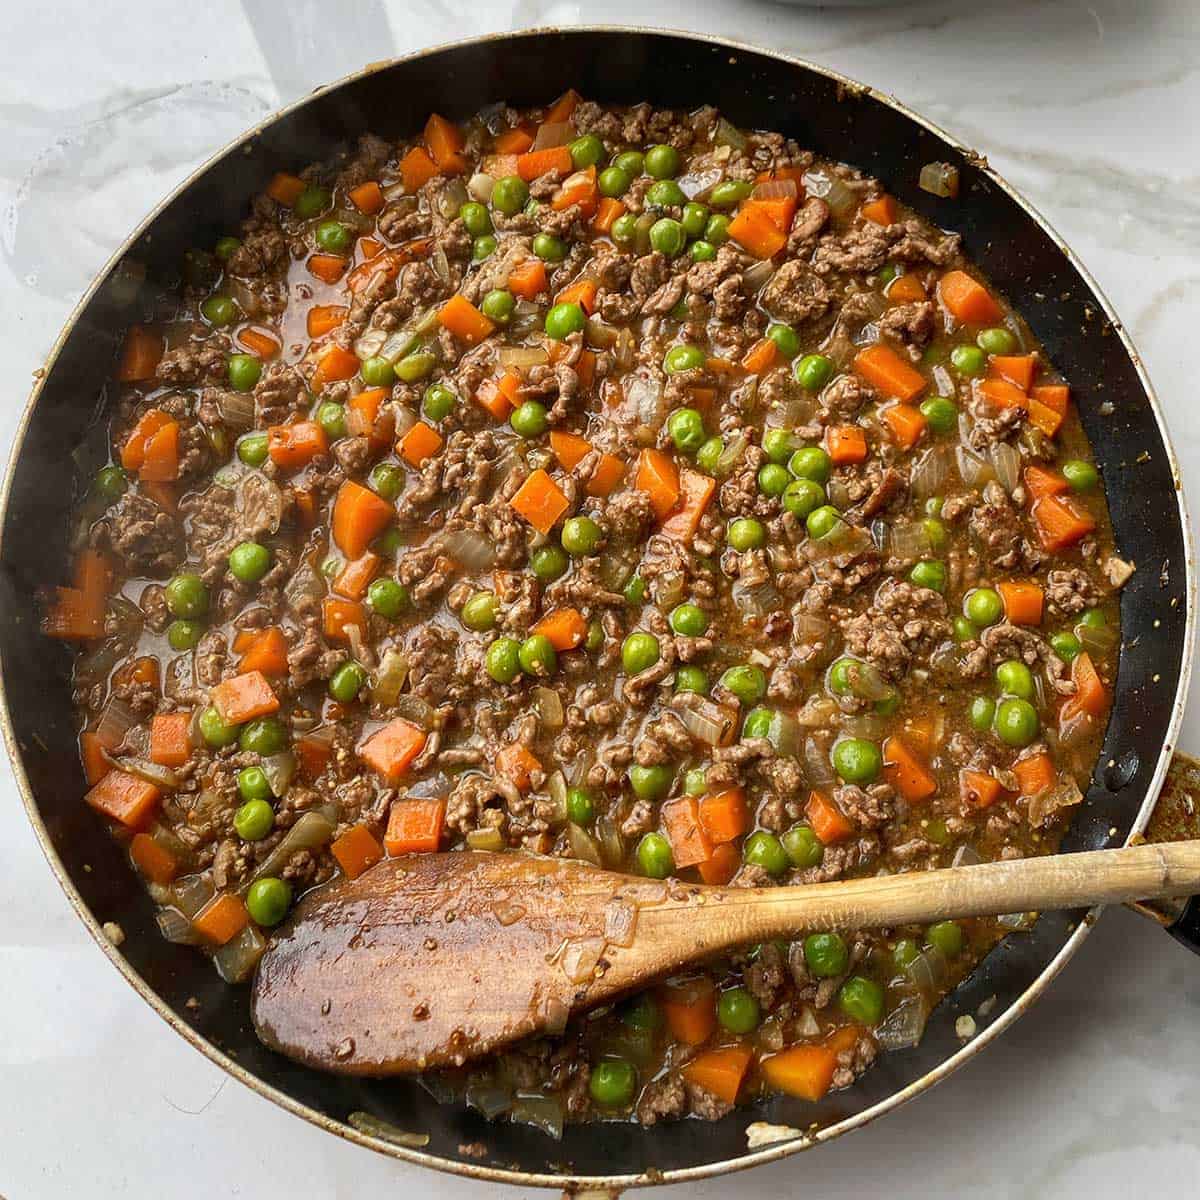 Cooked mince and vegetables in a pan.